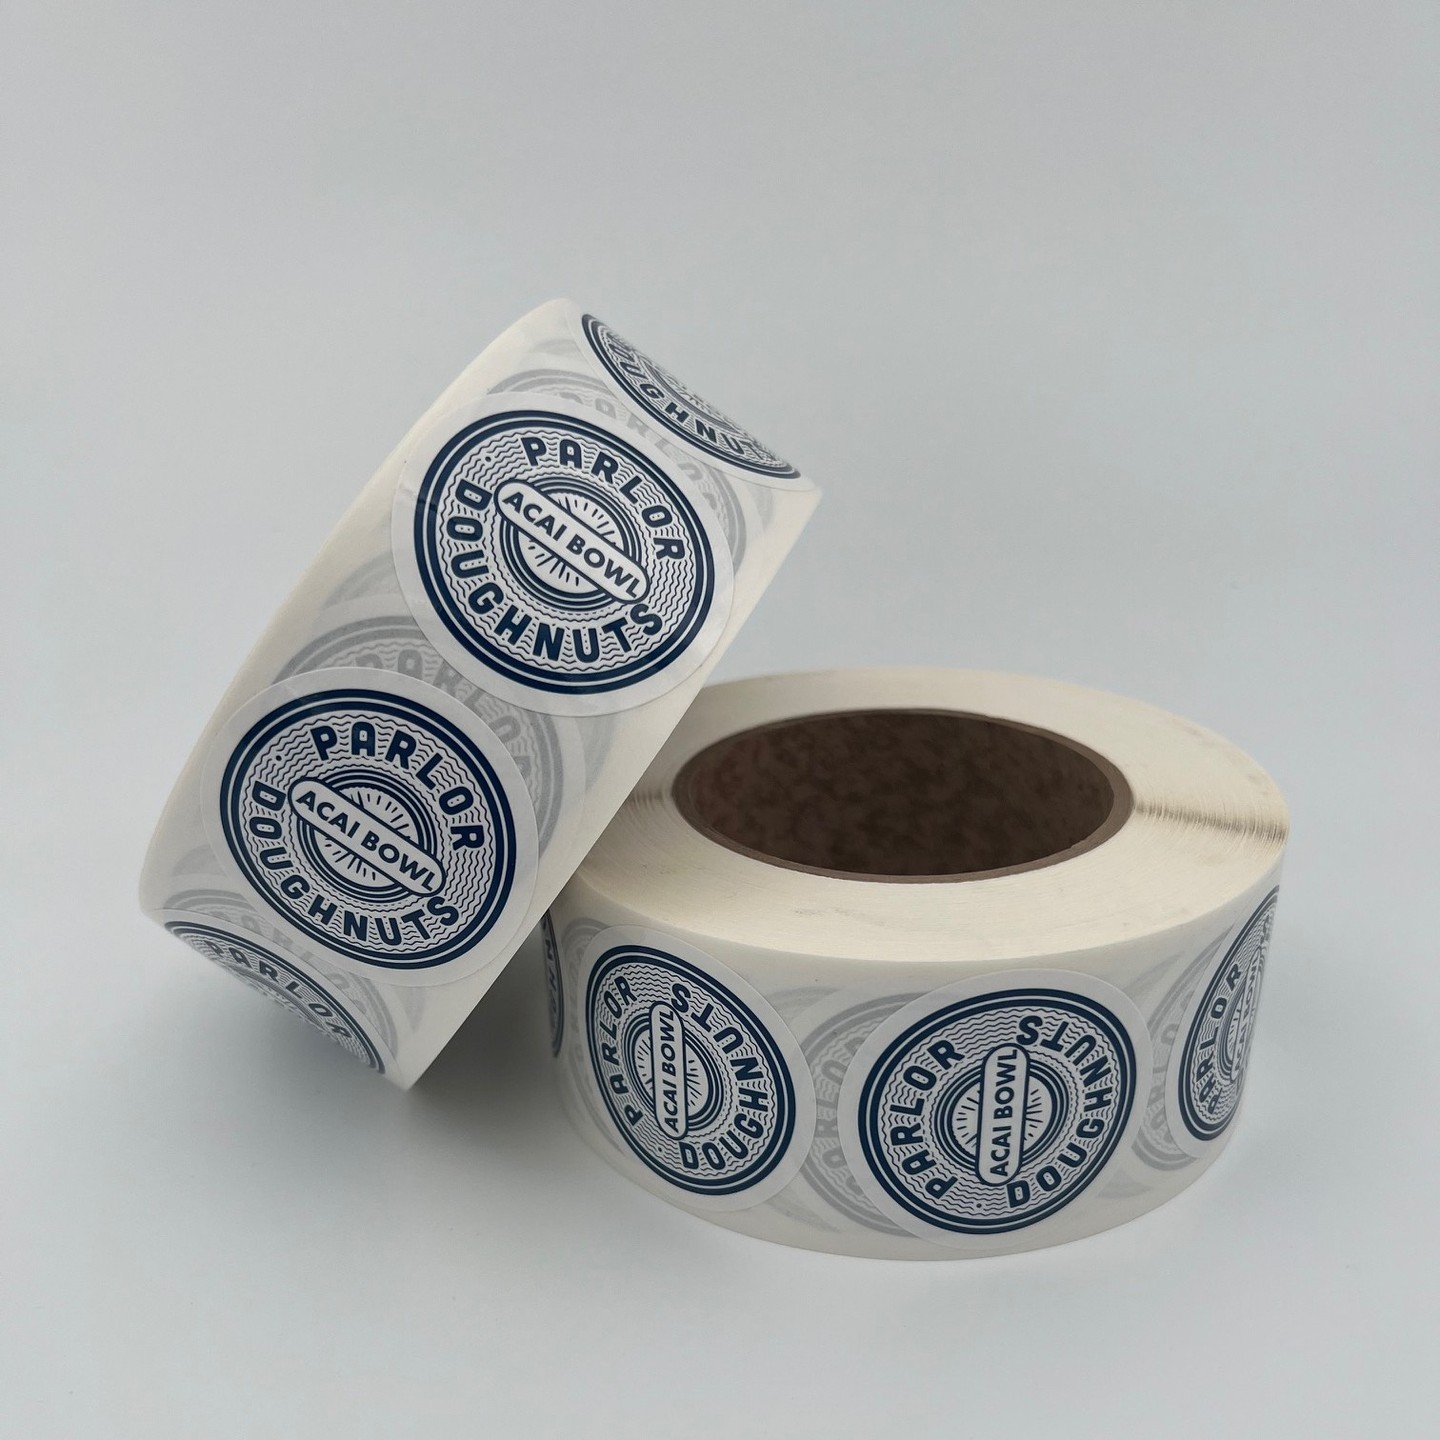 We even do labels! Sometimes it is better to have your stickers on a roll. Check out all the options that we have in roll labels and stickers. Need products we got you! Shout out to Parlor Doughnuts on doing these amazing labels.
https://loom.ly/RbFD2dE
 #shoutout #rolllabels #onaroll #doughnuts #stickers